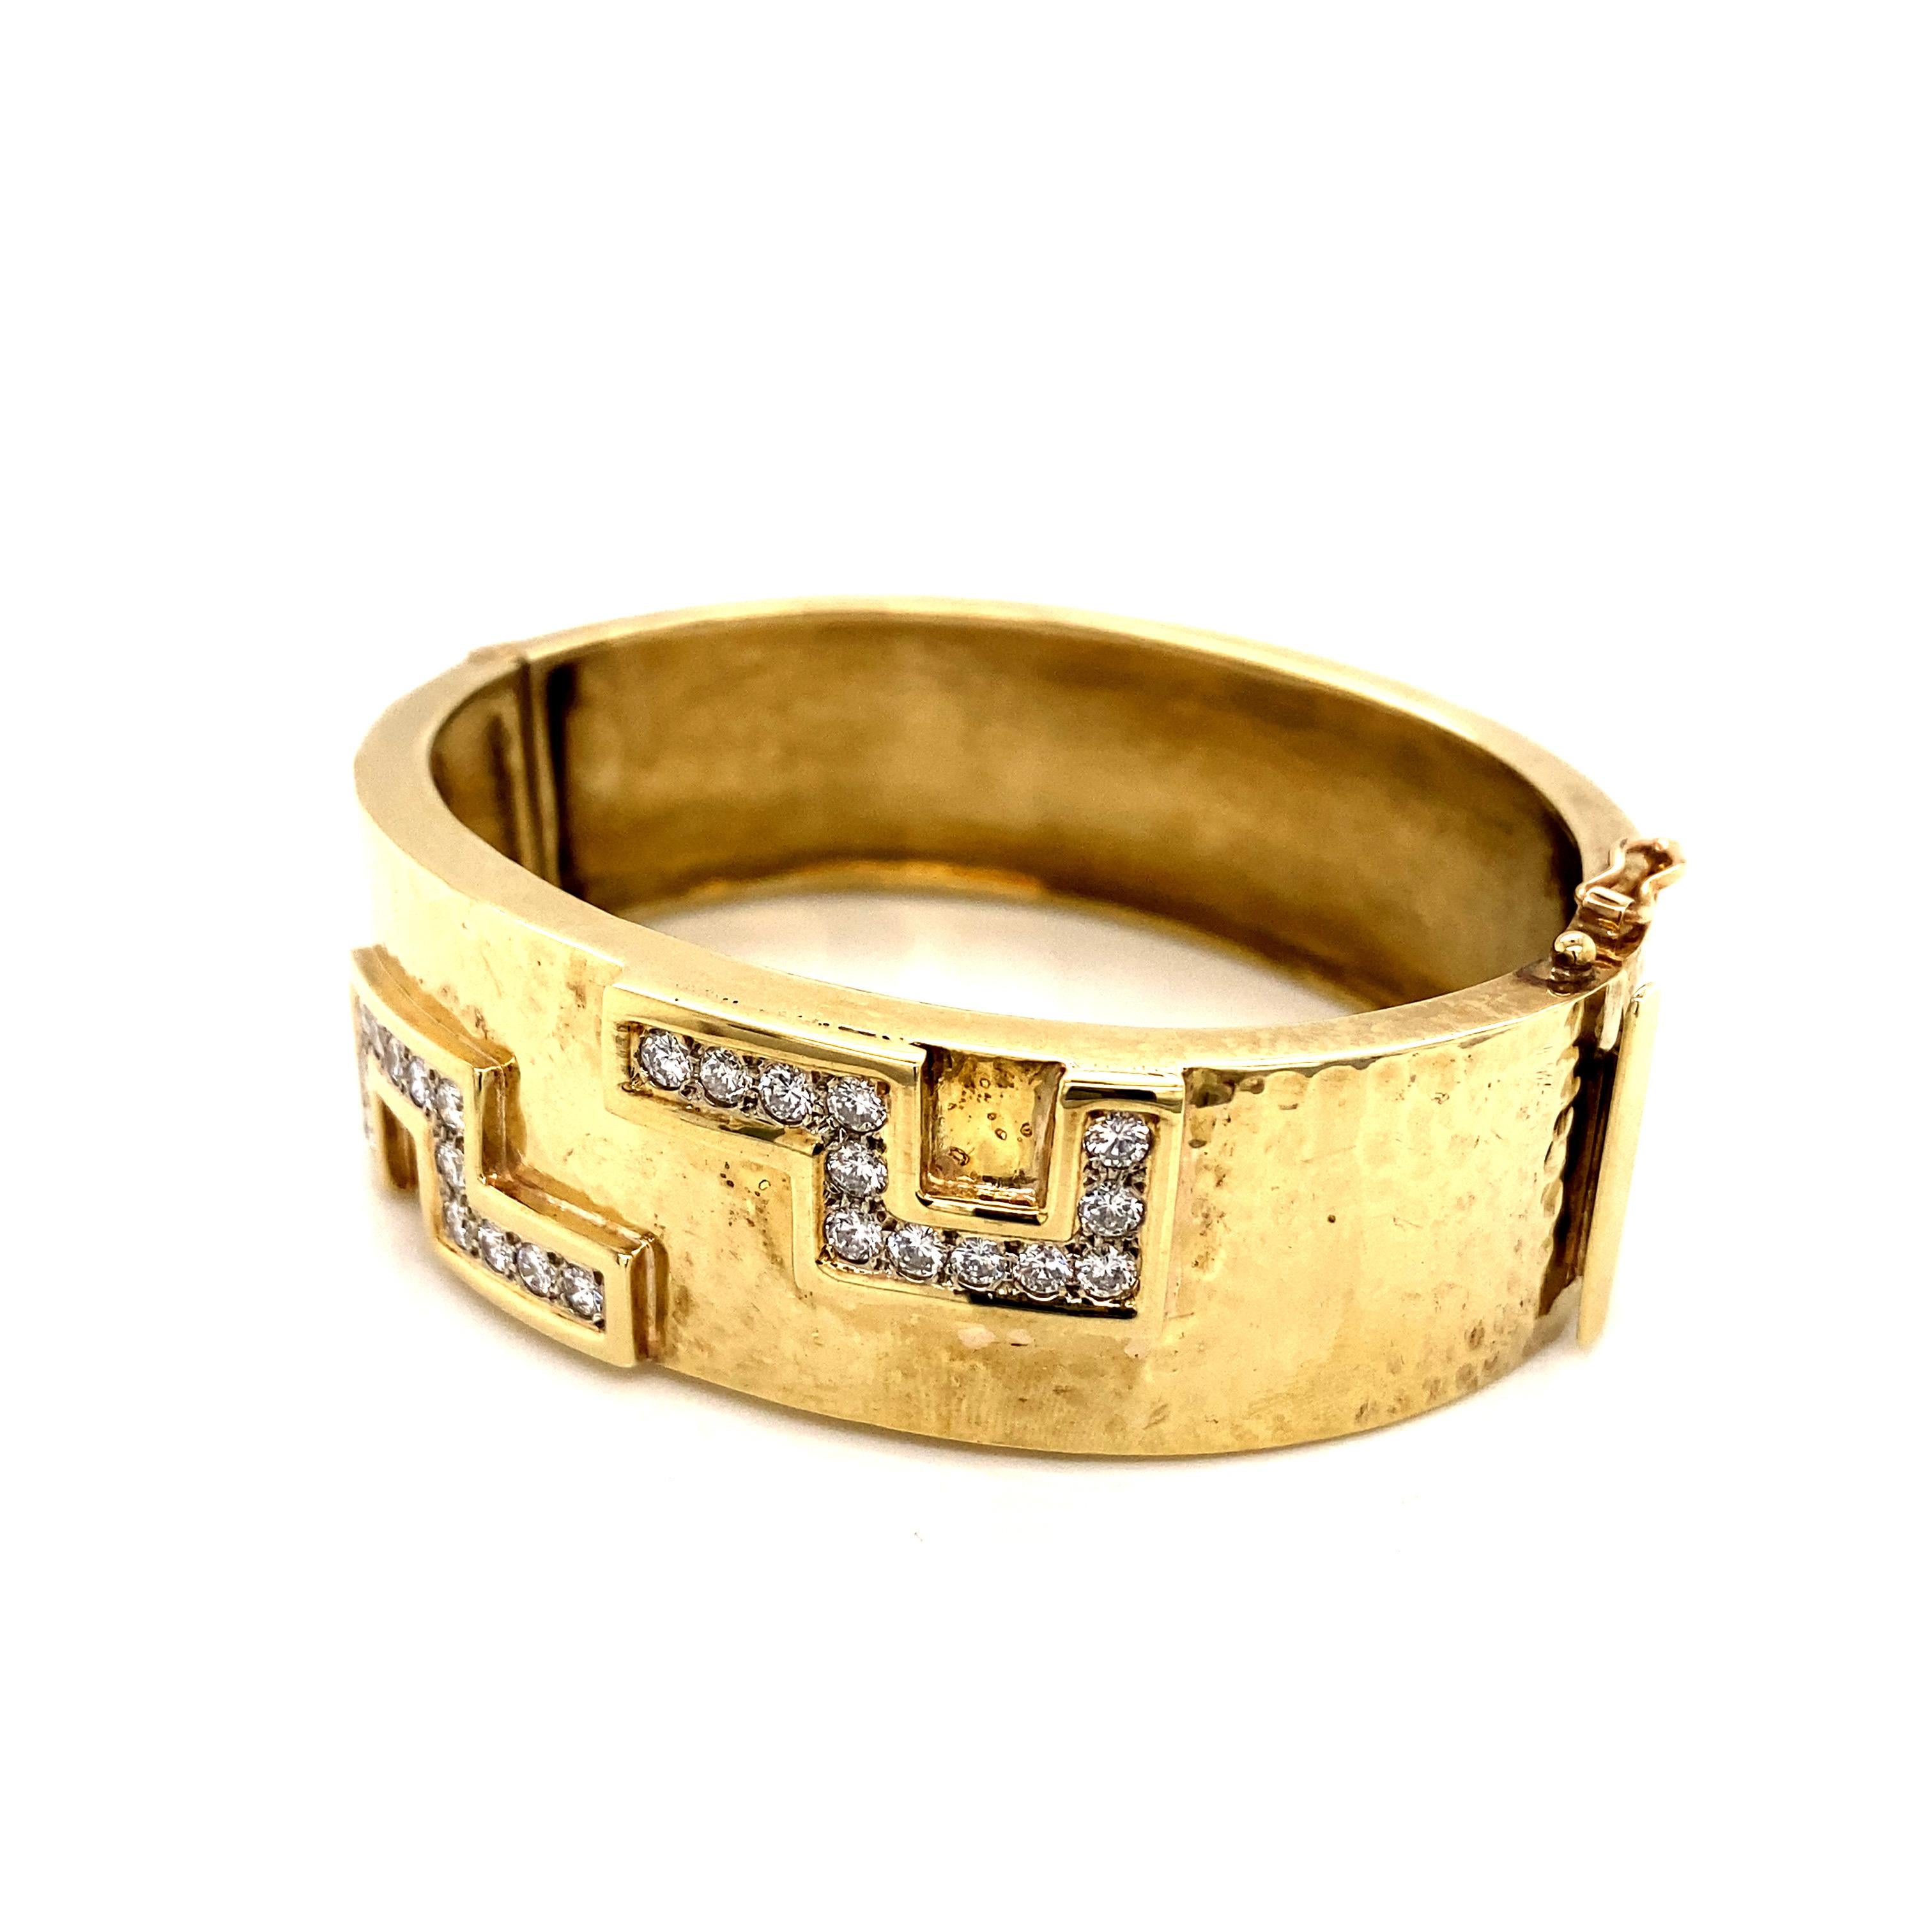 A true statement piece from the 1990s, this stunning 14k yellow gold bangle exudes timeless luxury and glamour. The substantial bracelet features a wide, substantial band that measures an impressive 0.75 inches (1.9 cm) in width for an eye-catching